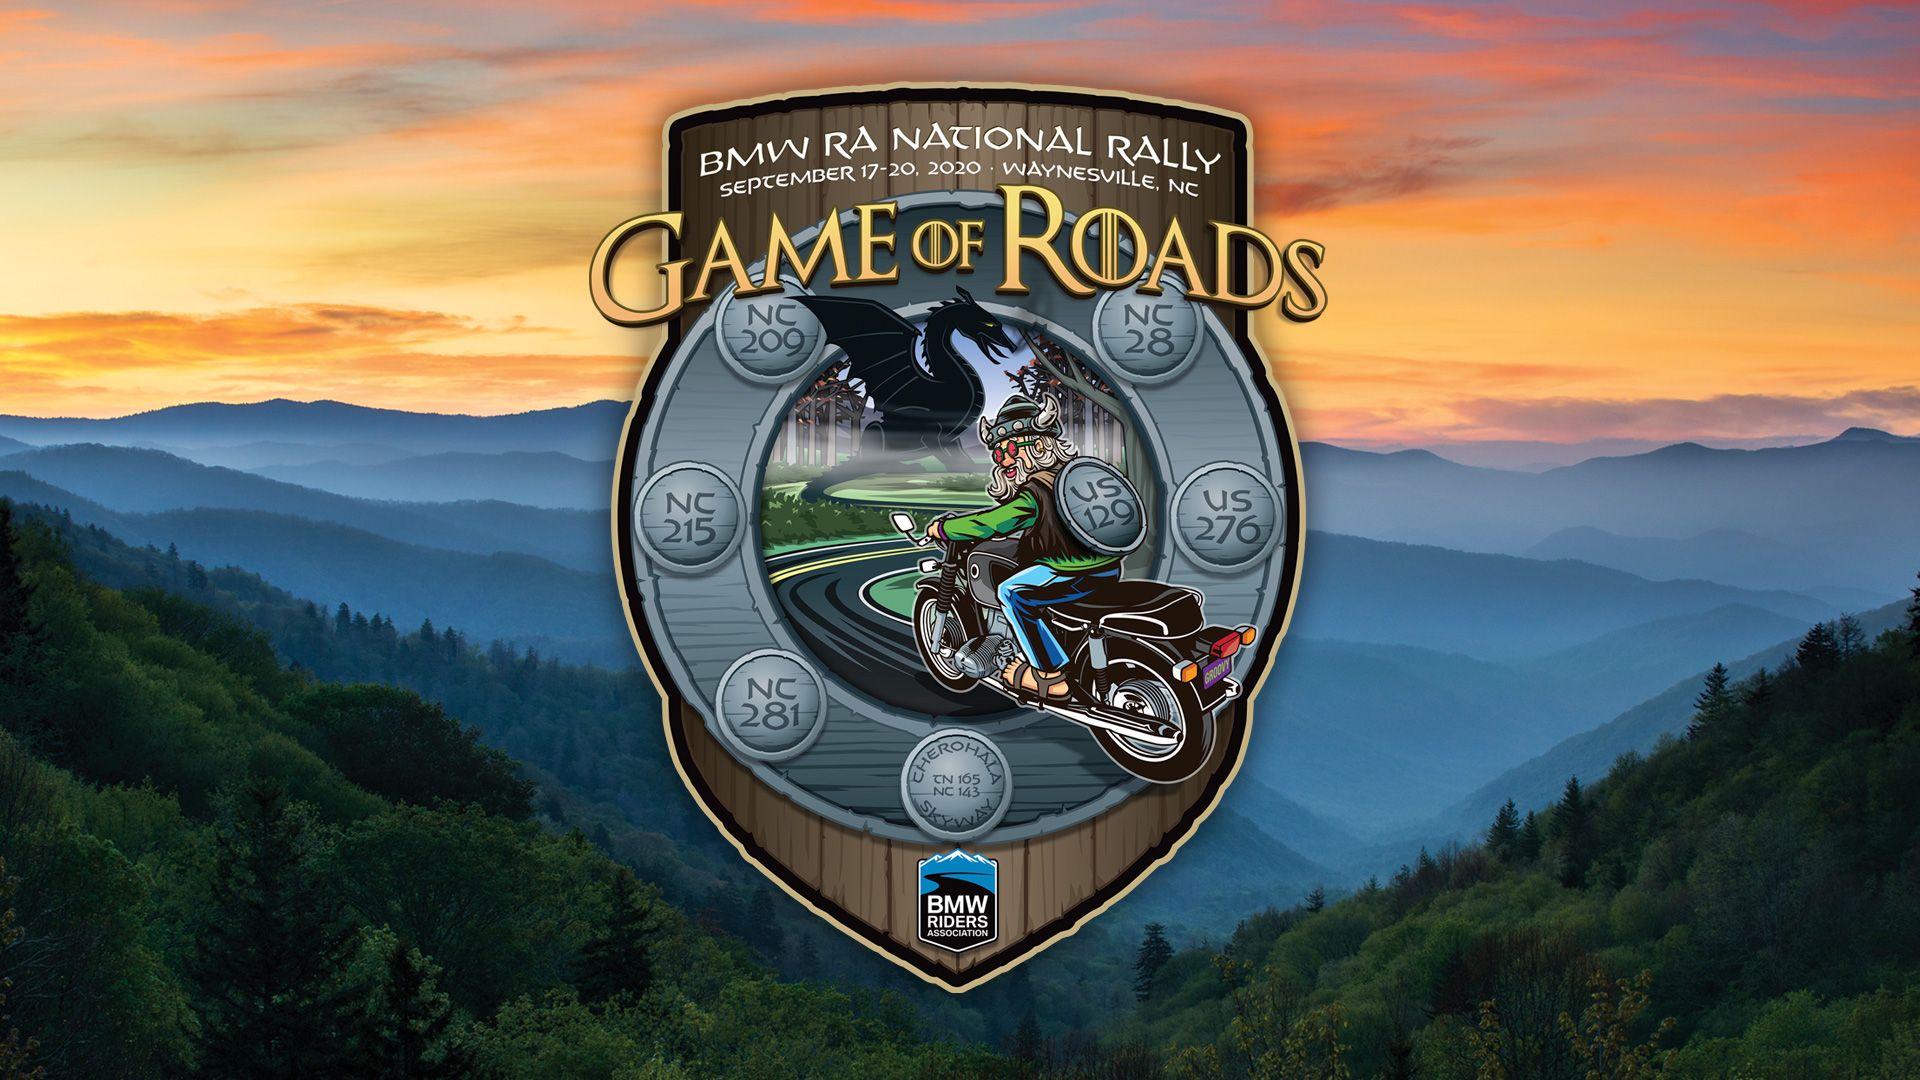 BMW Riders Association Announces Free Admission for First Responders and  Nurses to the 2020 National Rally - BMW Riders Association